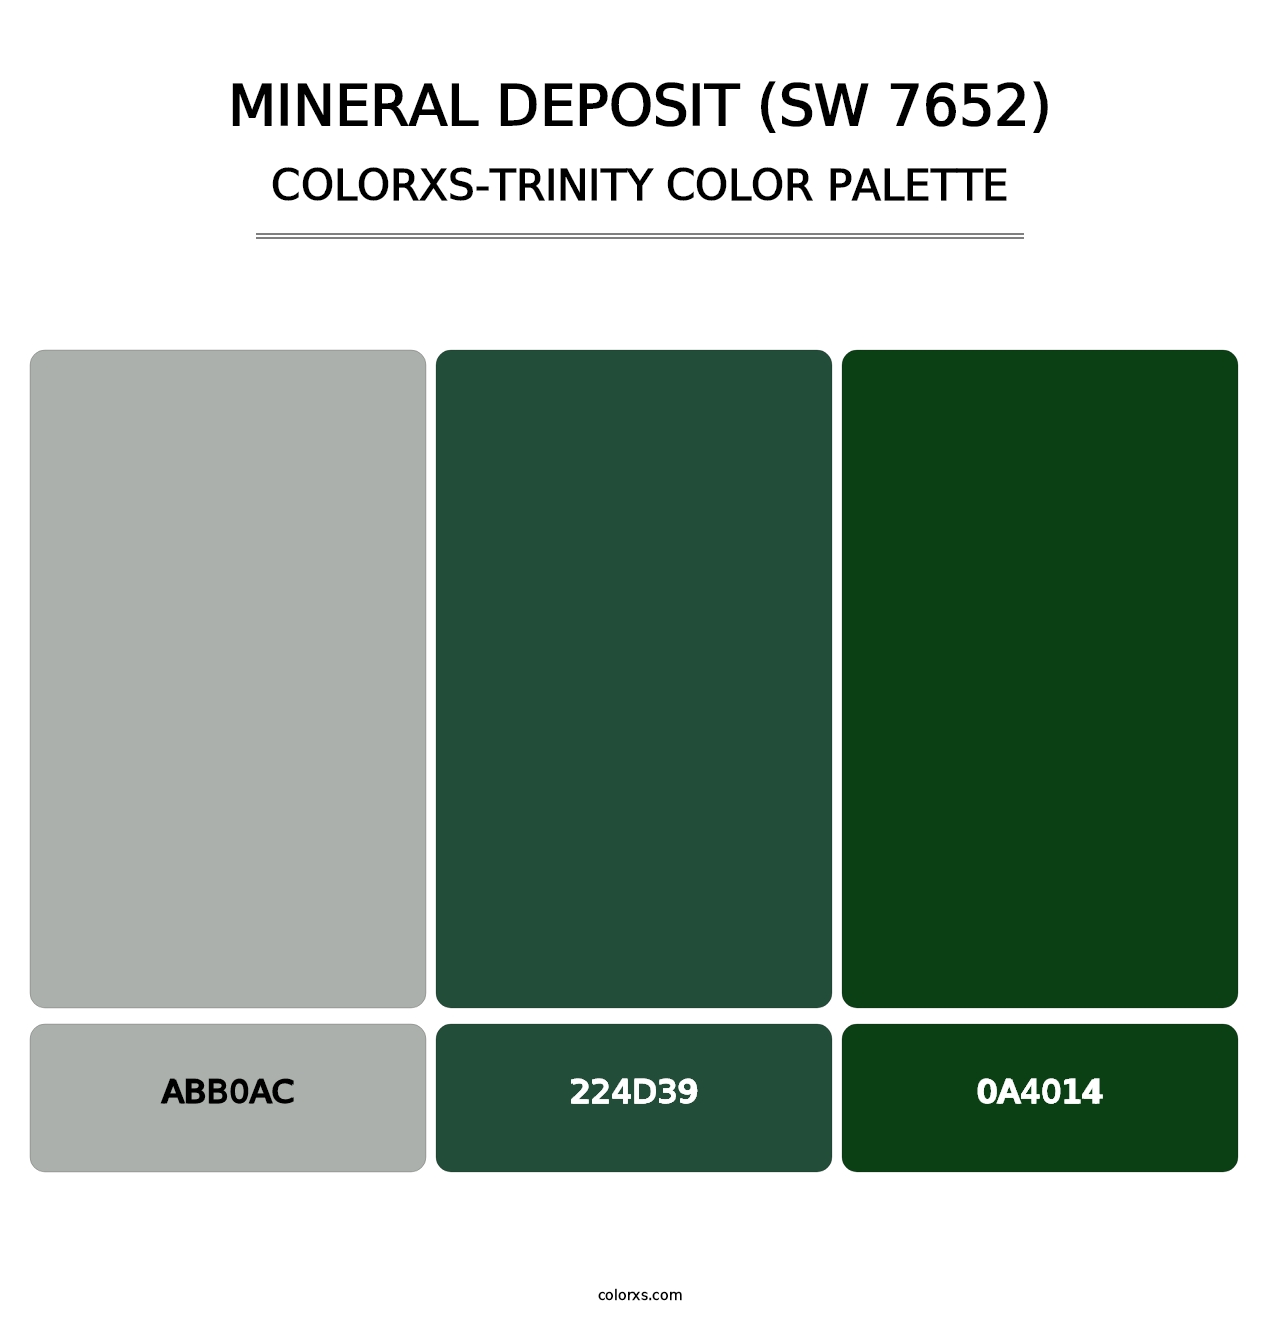 Mineral Deposit (SW 7652) - Colorxs Trinity Palette